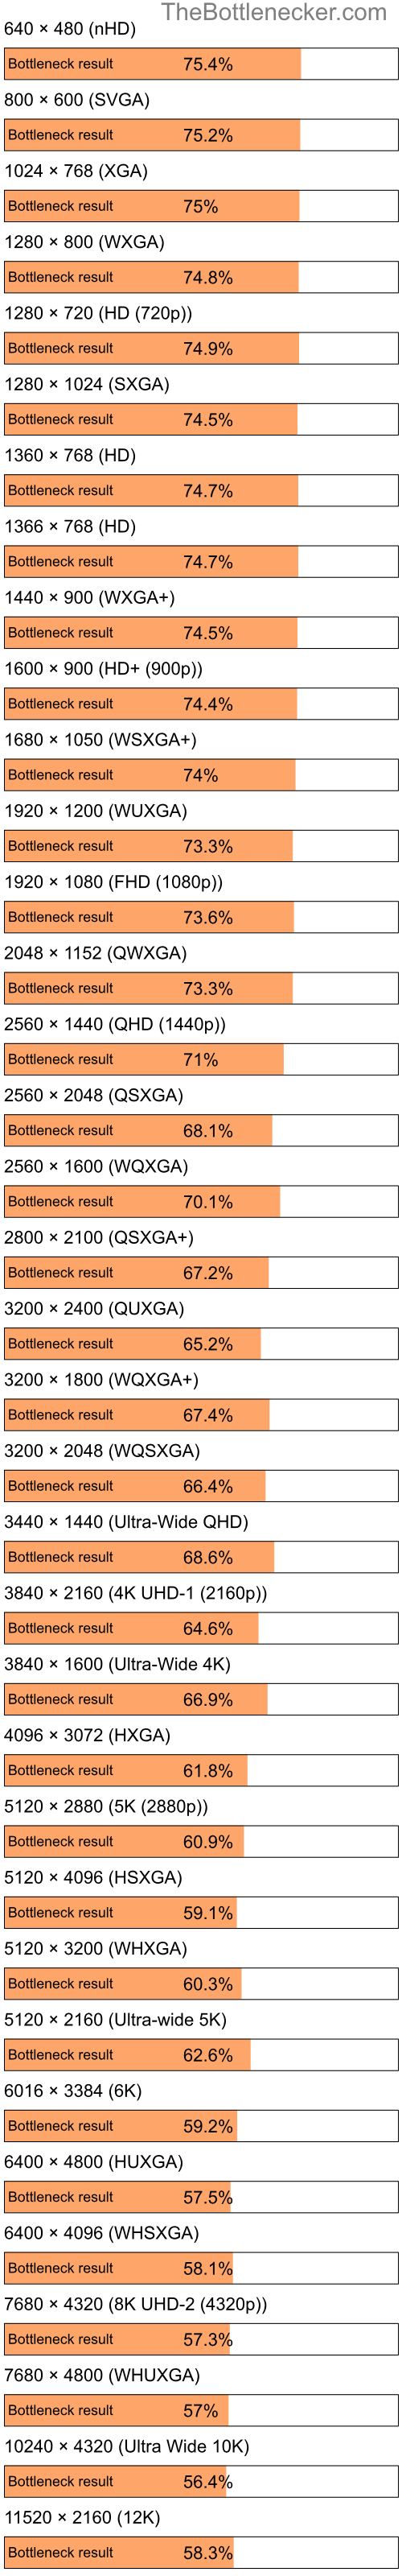 Bottleneck results by resolution for AMD Phenom II X4 810 and NVIDIA GeForce RTX 4060 in Processor Intense Tasks